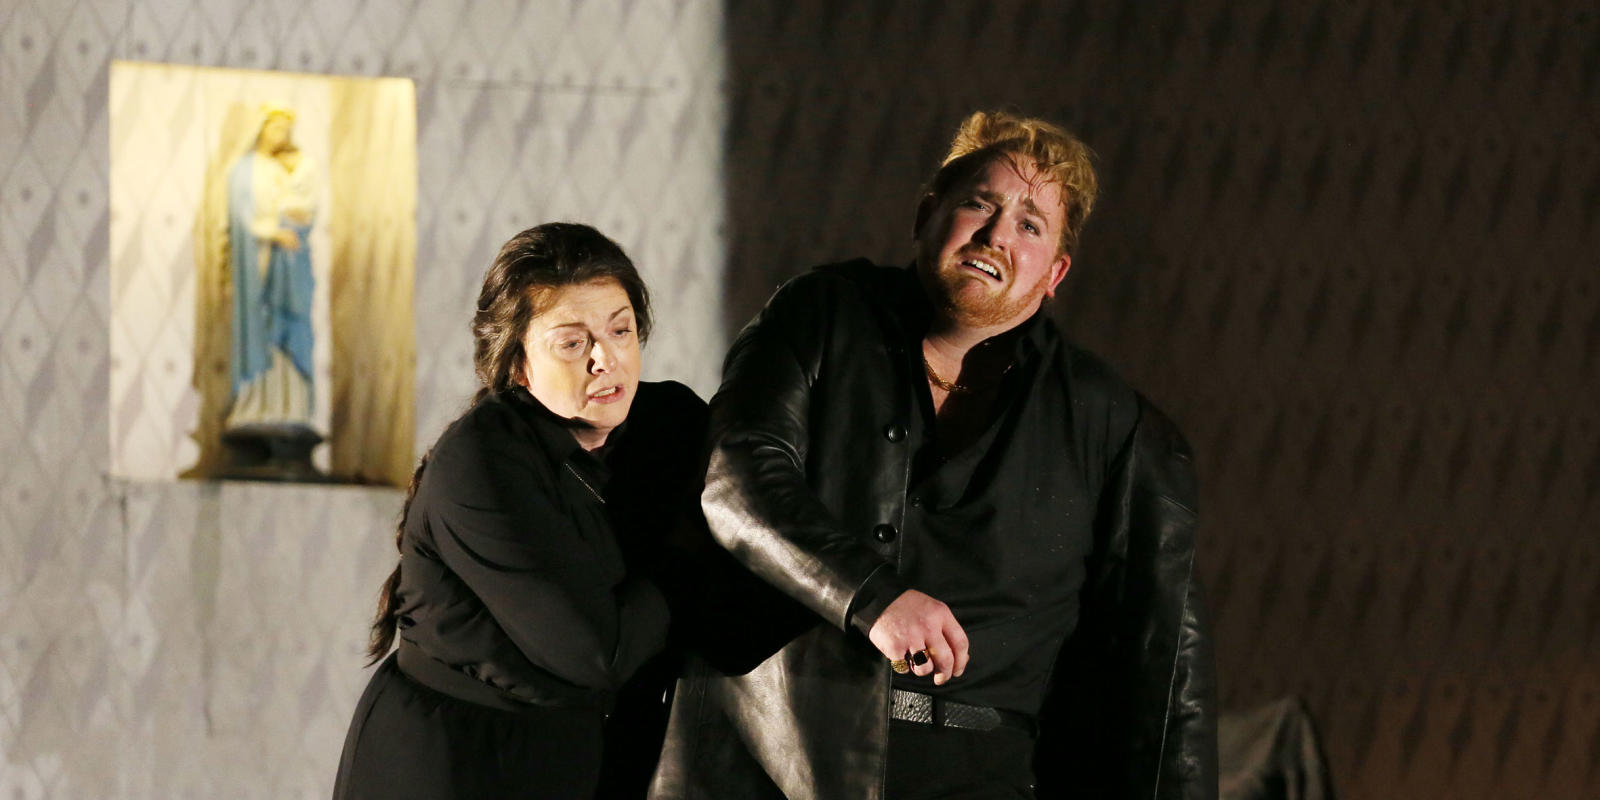 Visibly distraught man with ginger hair in a black coat being ushered by a woman in ENO's Jenufa